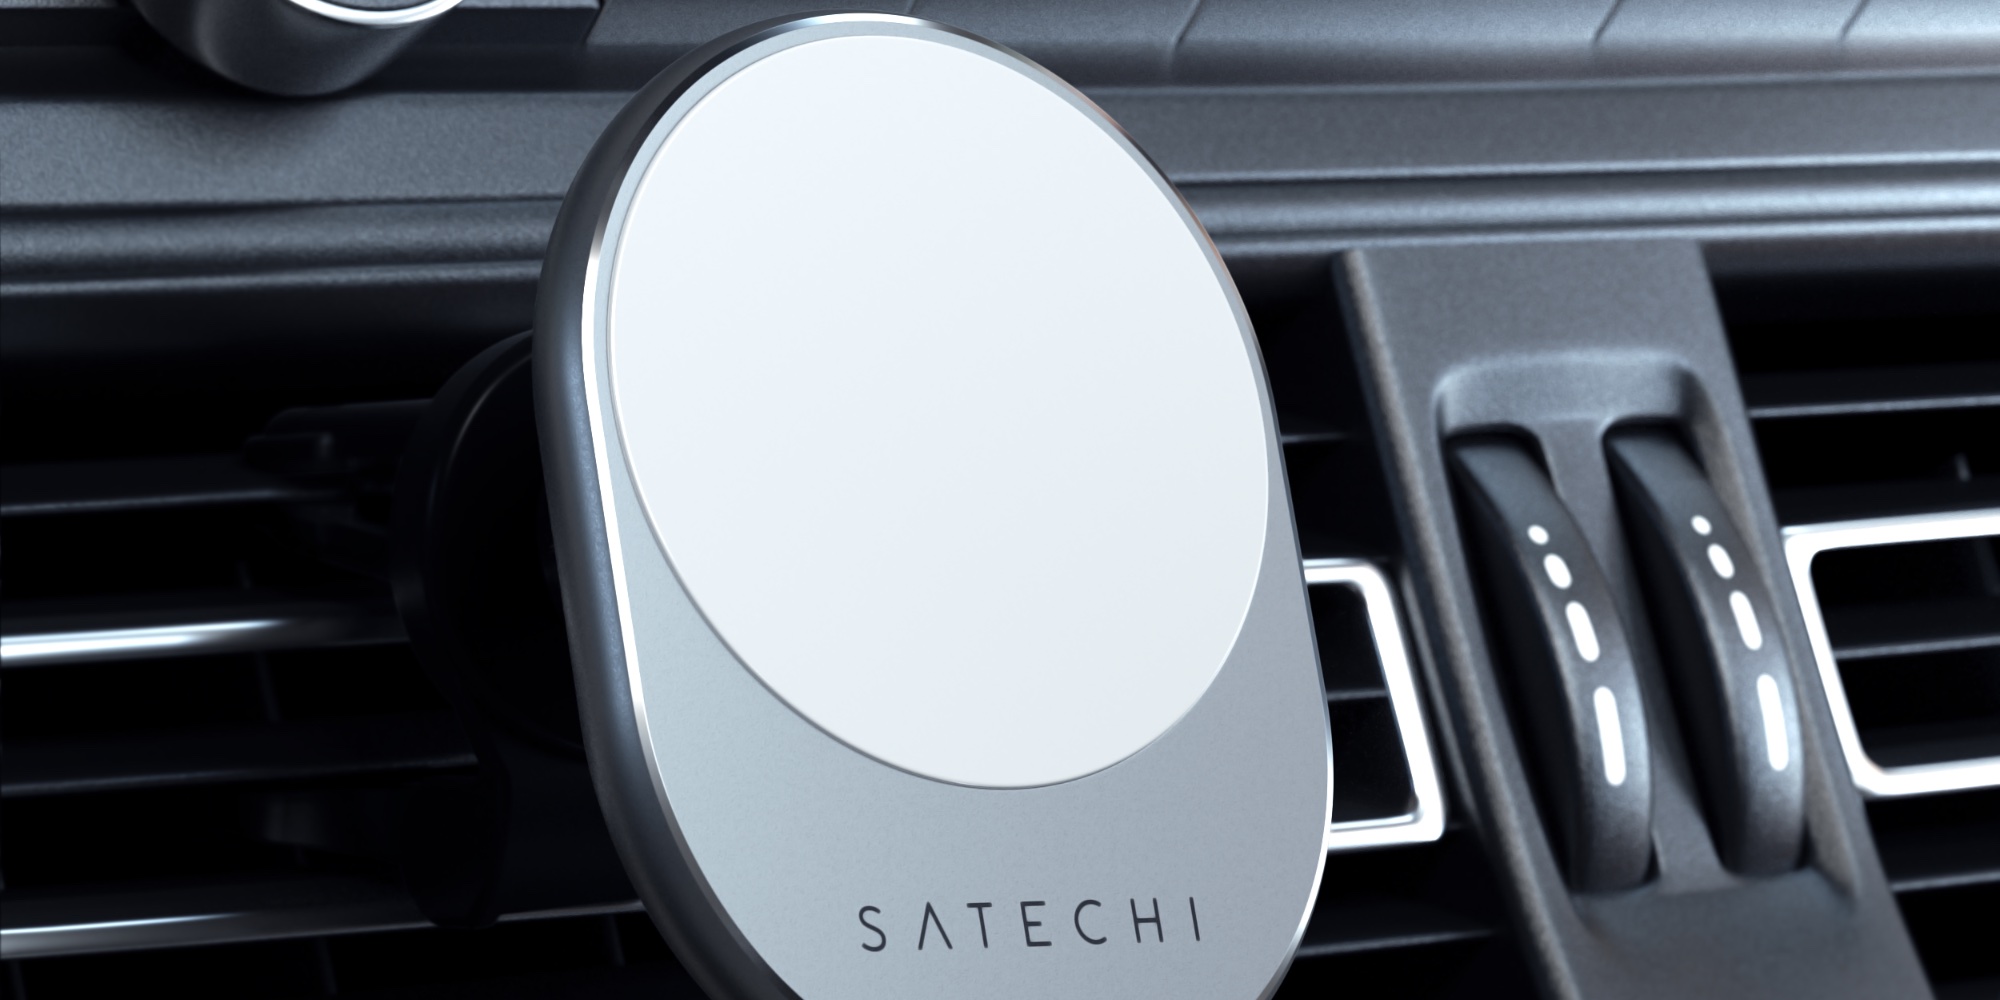 https://9to5toys.com/wp-content/uploads/sites/5/2021/09/satechi-magsafe-car-charger.jpg